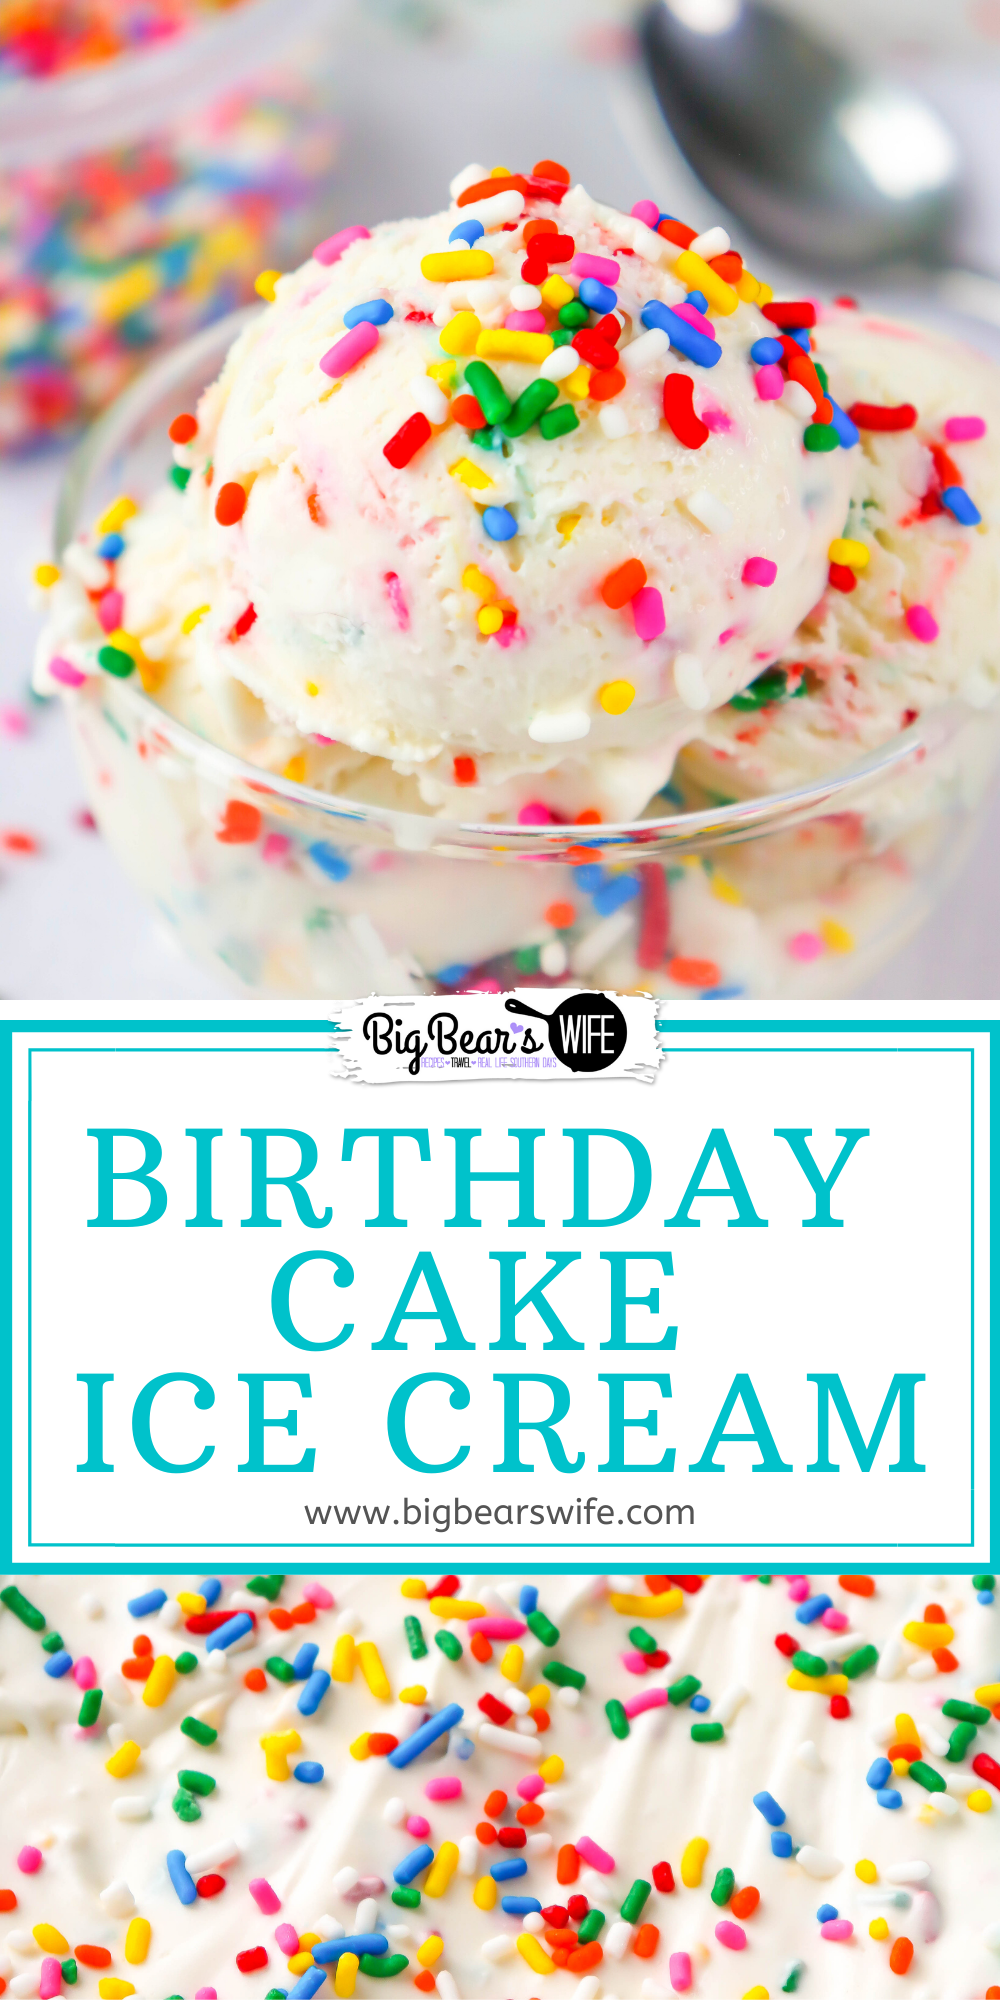 This fun no churn Birthday Cake Ice Cream is the perfect homemade Birthday Cake Ice Cream recipe to make for a birthday party or at home celebration! No ice cream machine needed and it's full of vanilla, sprinkles and that class Birthday Cake flavor! via @bigbearswife